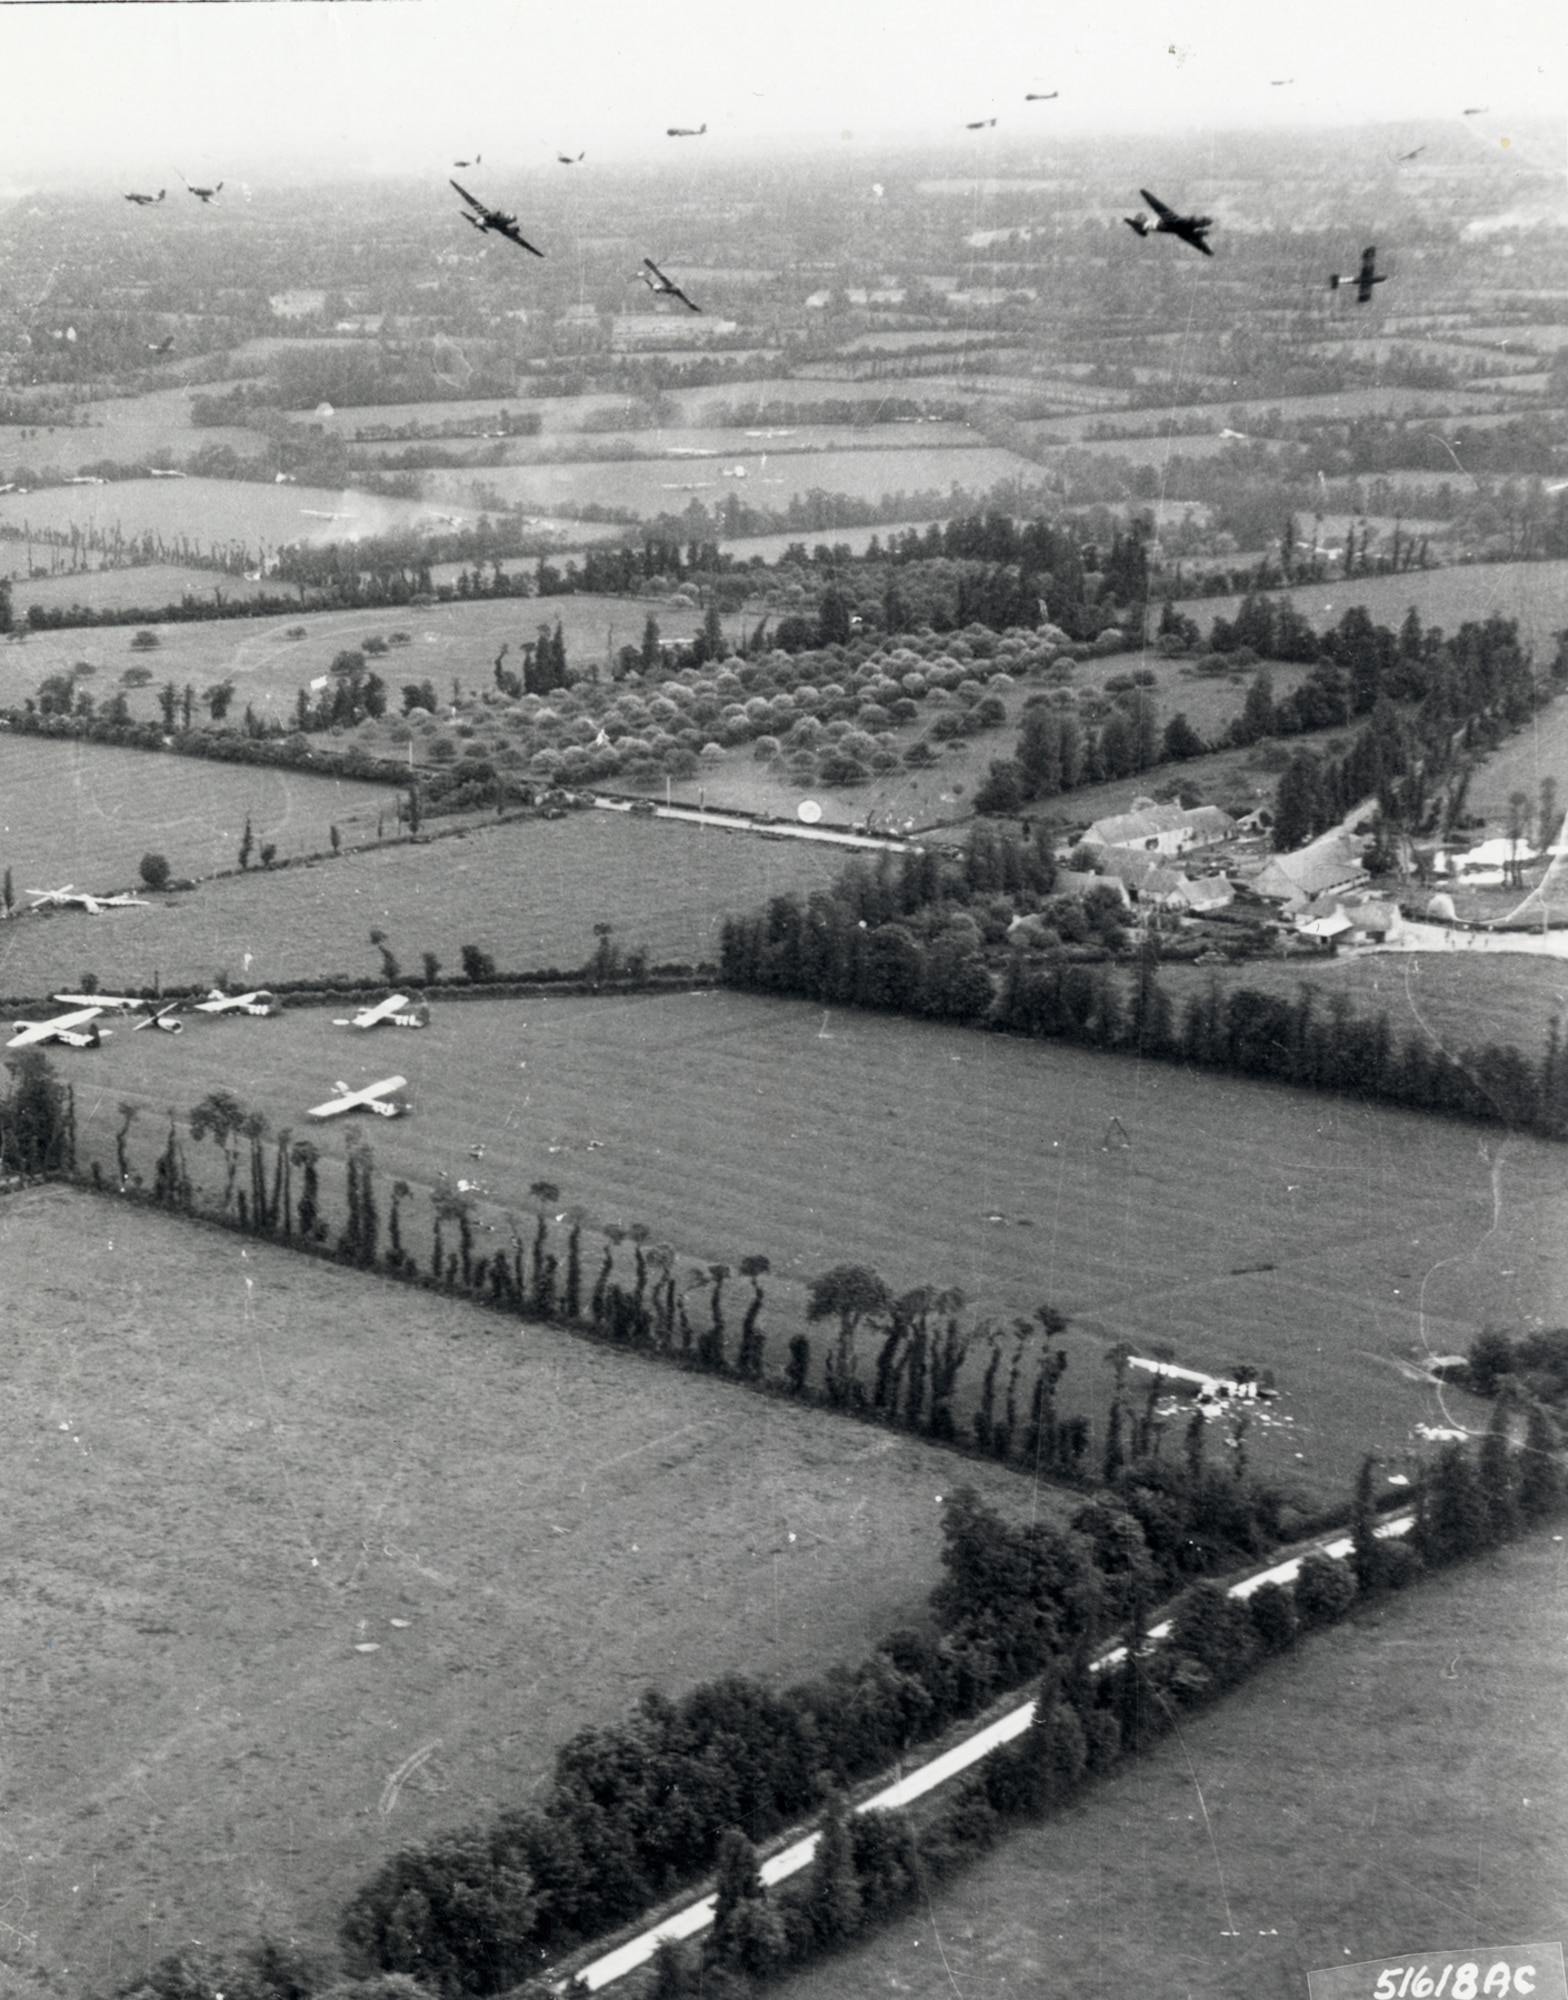 C-47s bank for England after their CG-4A gliders have cut loose from their tow lines. (U.S. Air Force photo)